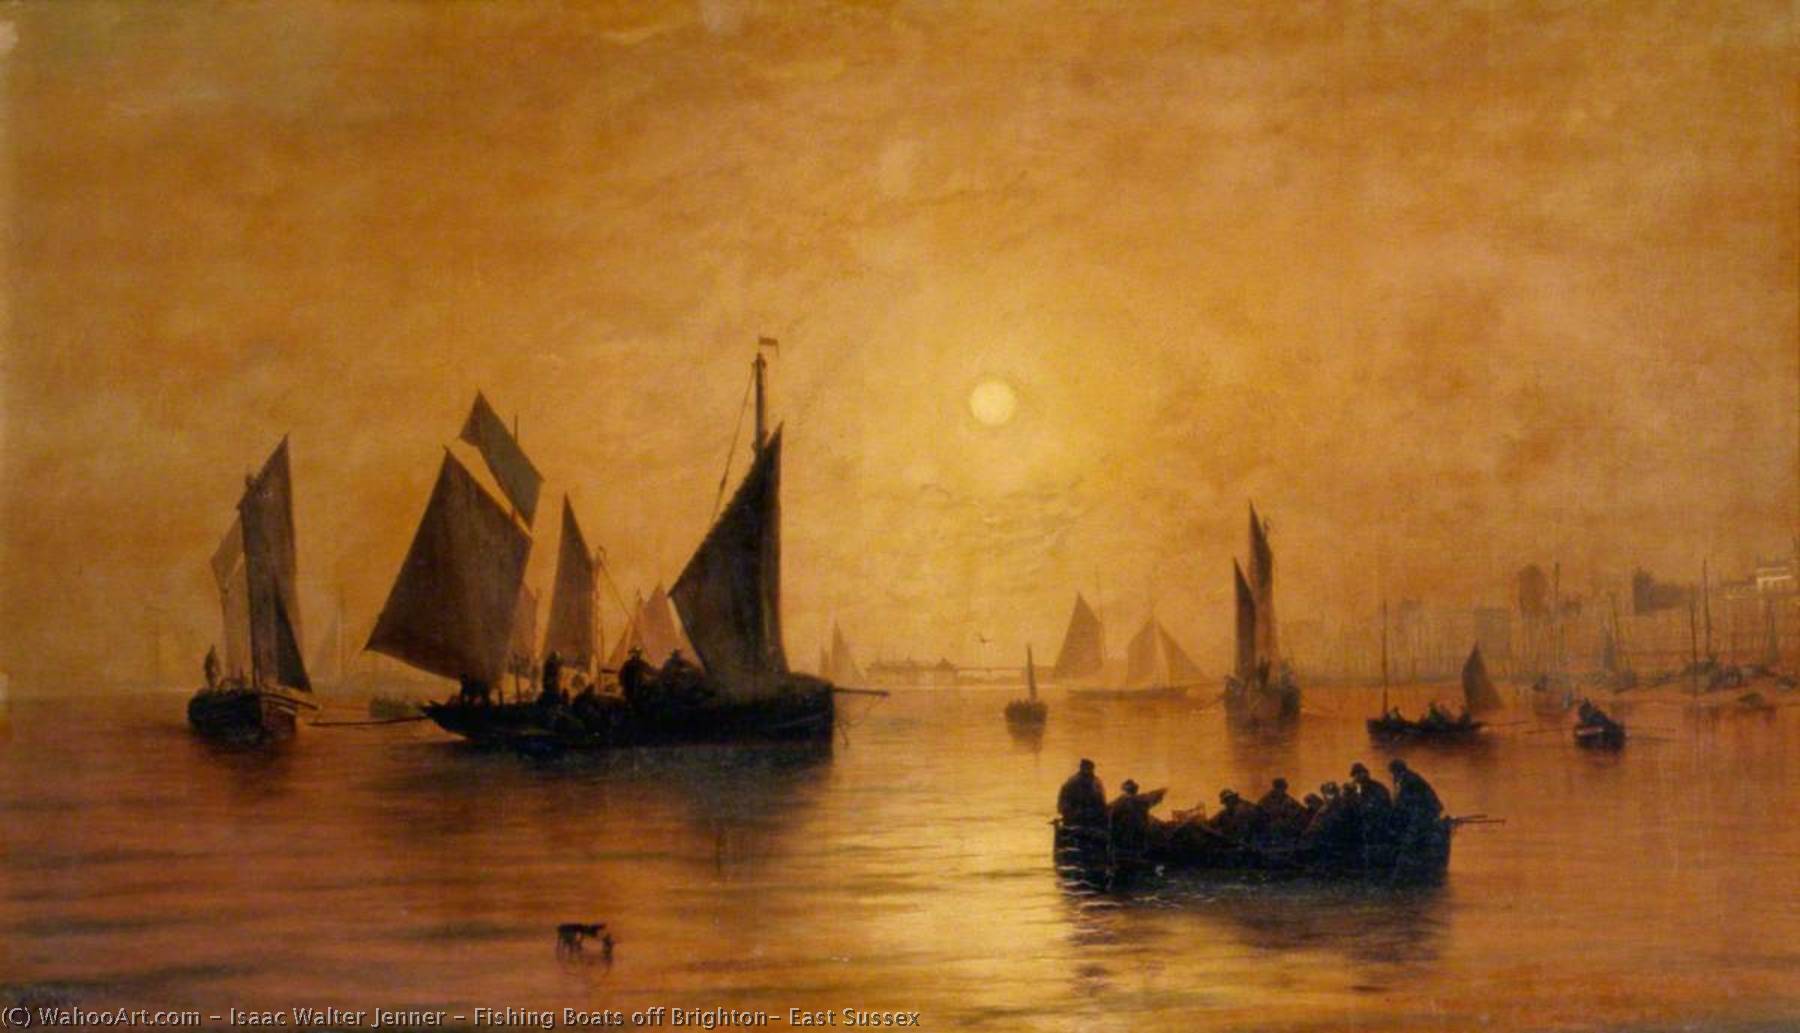 WikiOO.org - Encyclopedia of Fine Arts - Maleri, Artwork Isaac Walter Jenner - Fishing Boats off Brighton, East Sussex